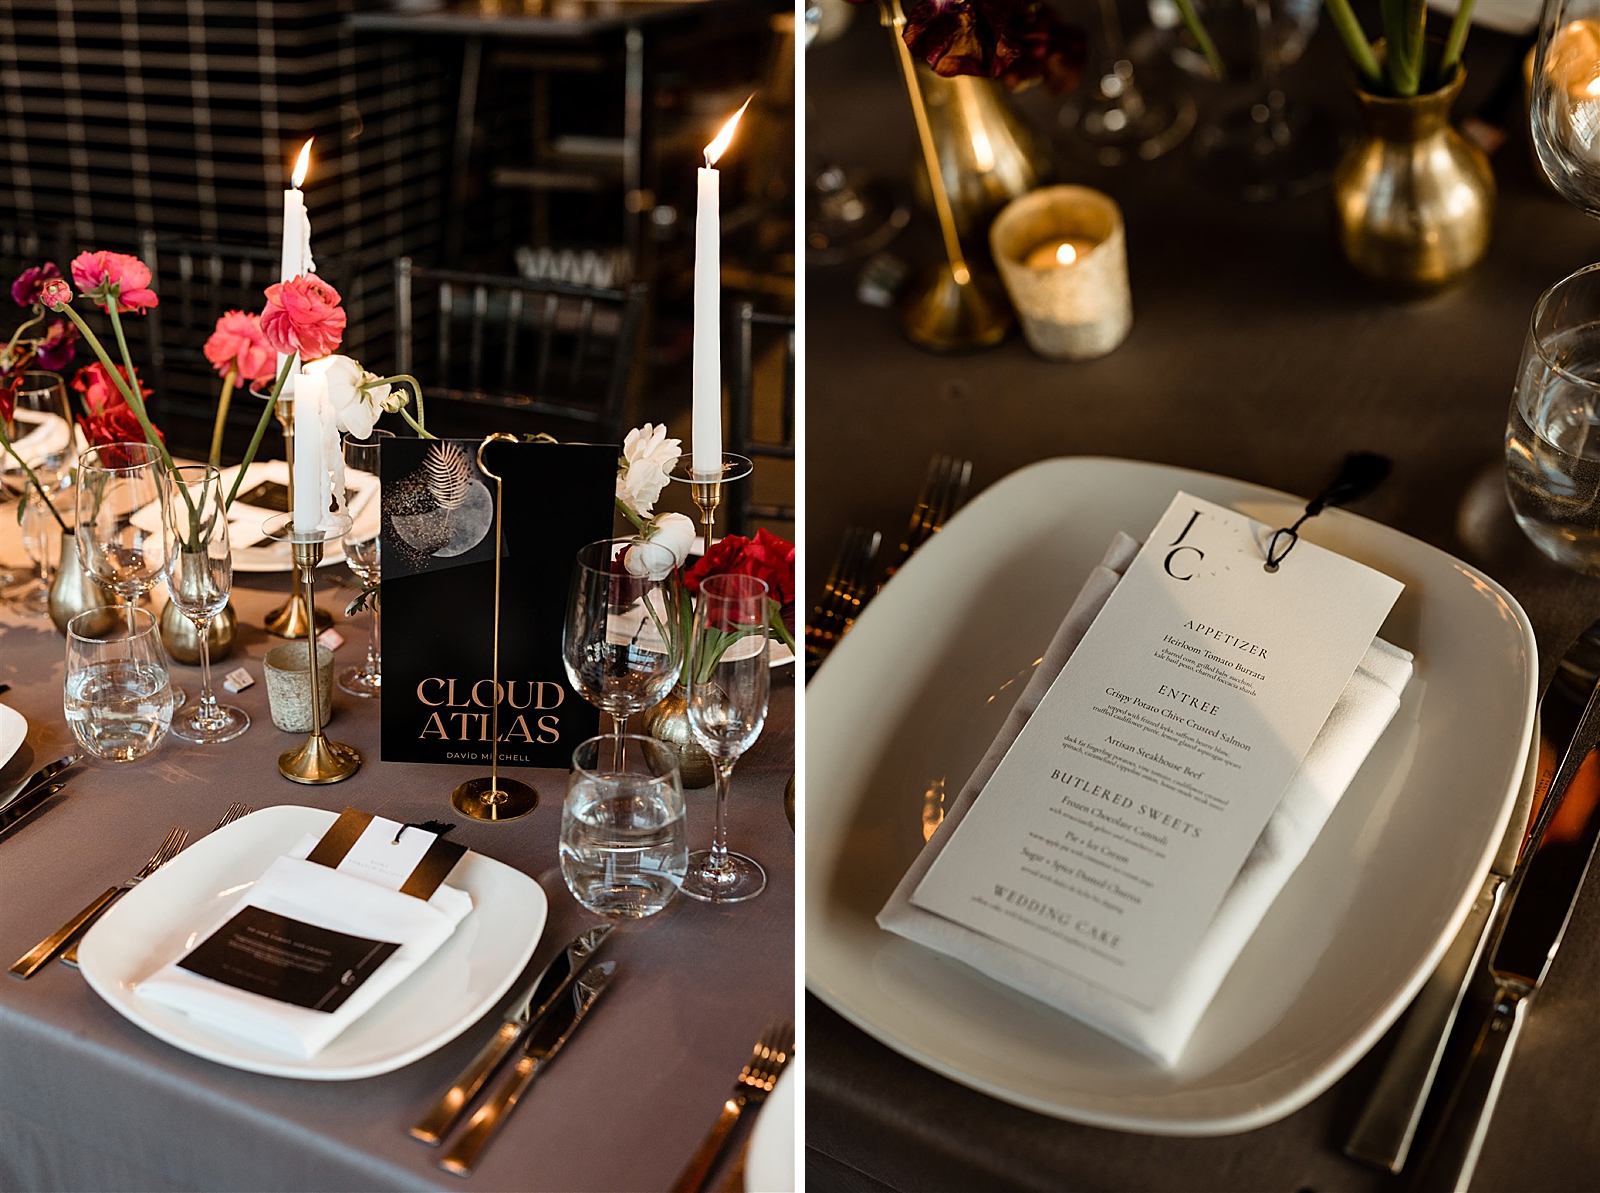 Left photo: Shot of a place setting on the reception table.
Right photo: Shot of the dinner menu resting on top of a place setting. 